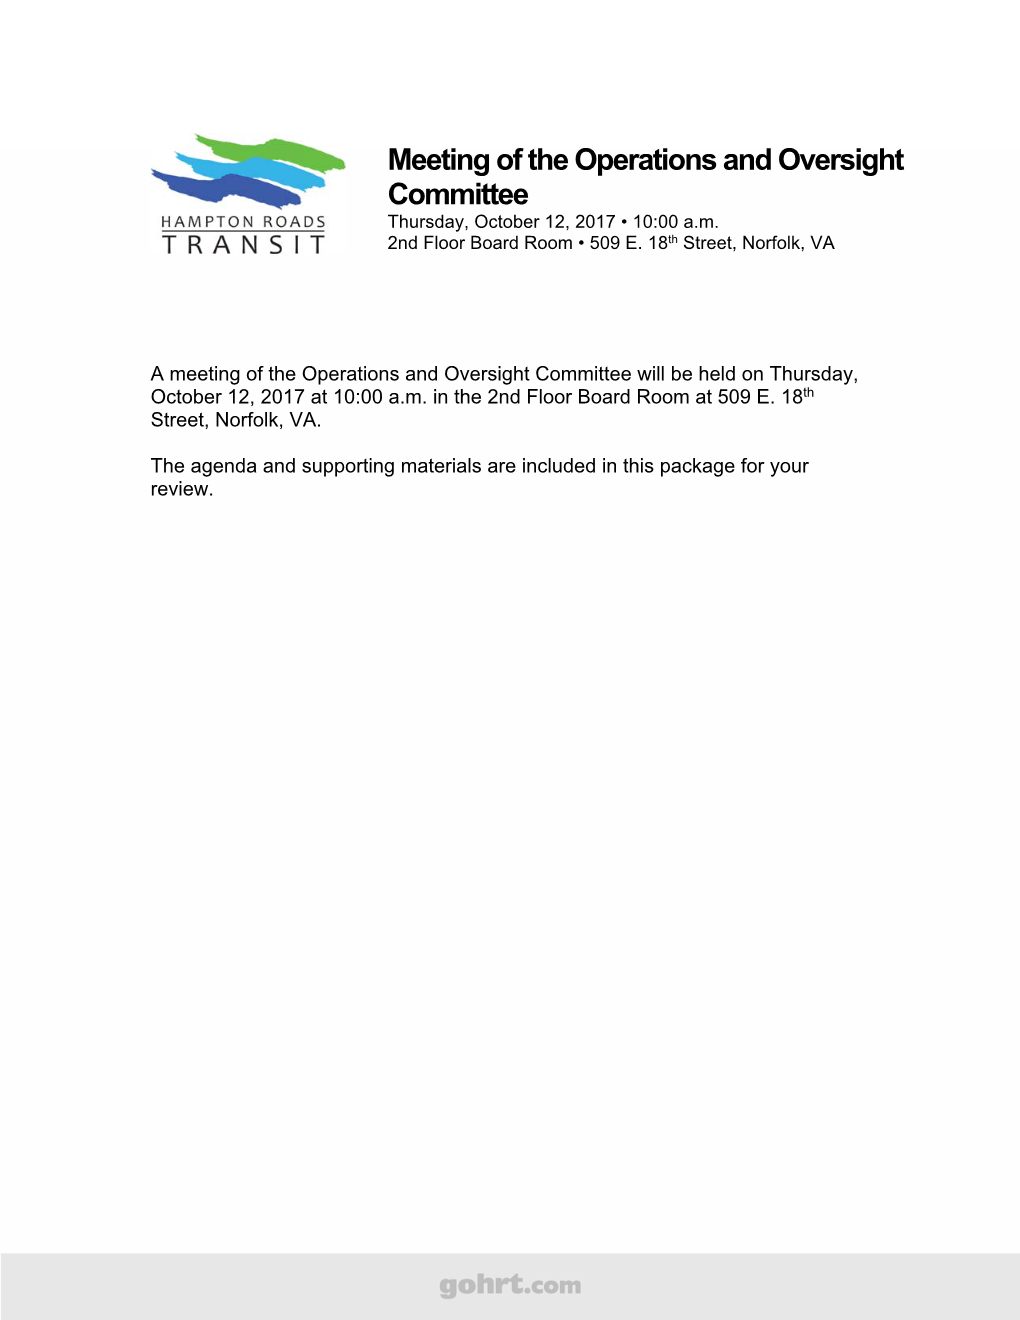 Meeting of the Operations and Oversight Committee Thursday, October 12, 2017 • 10:00 A.M